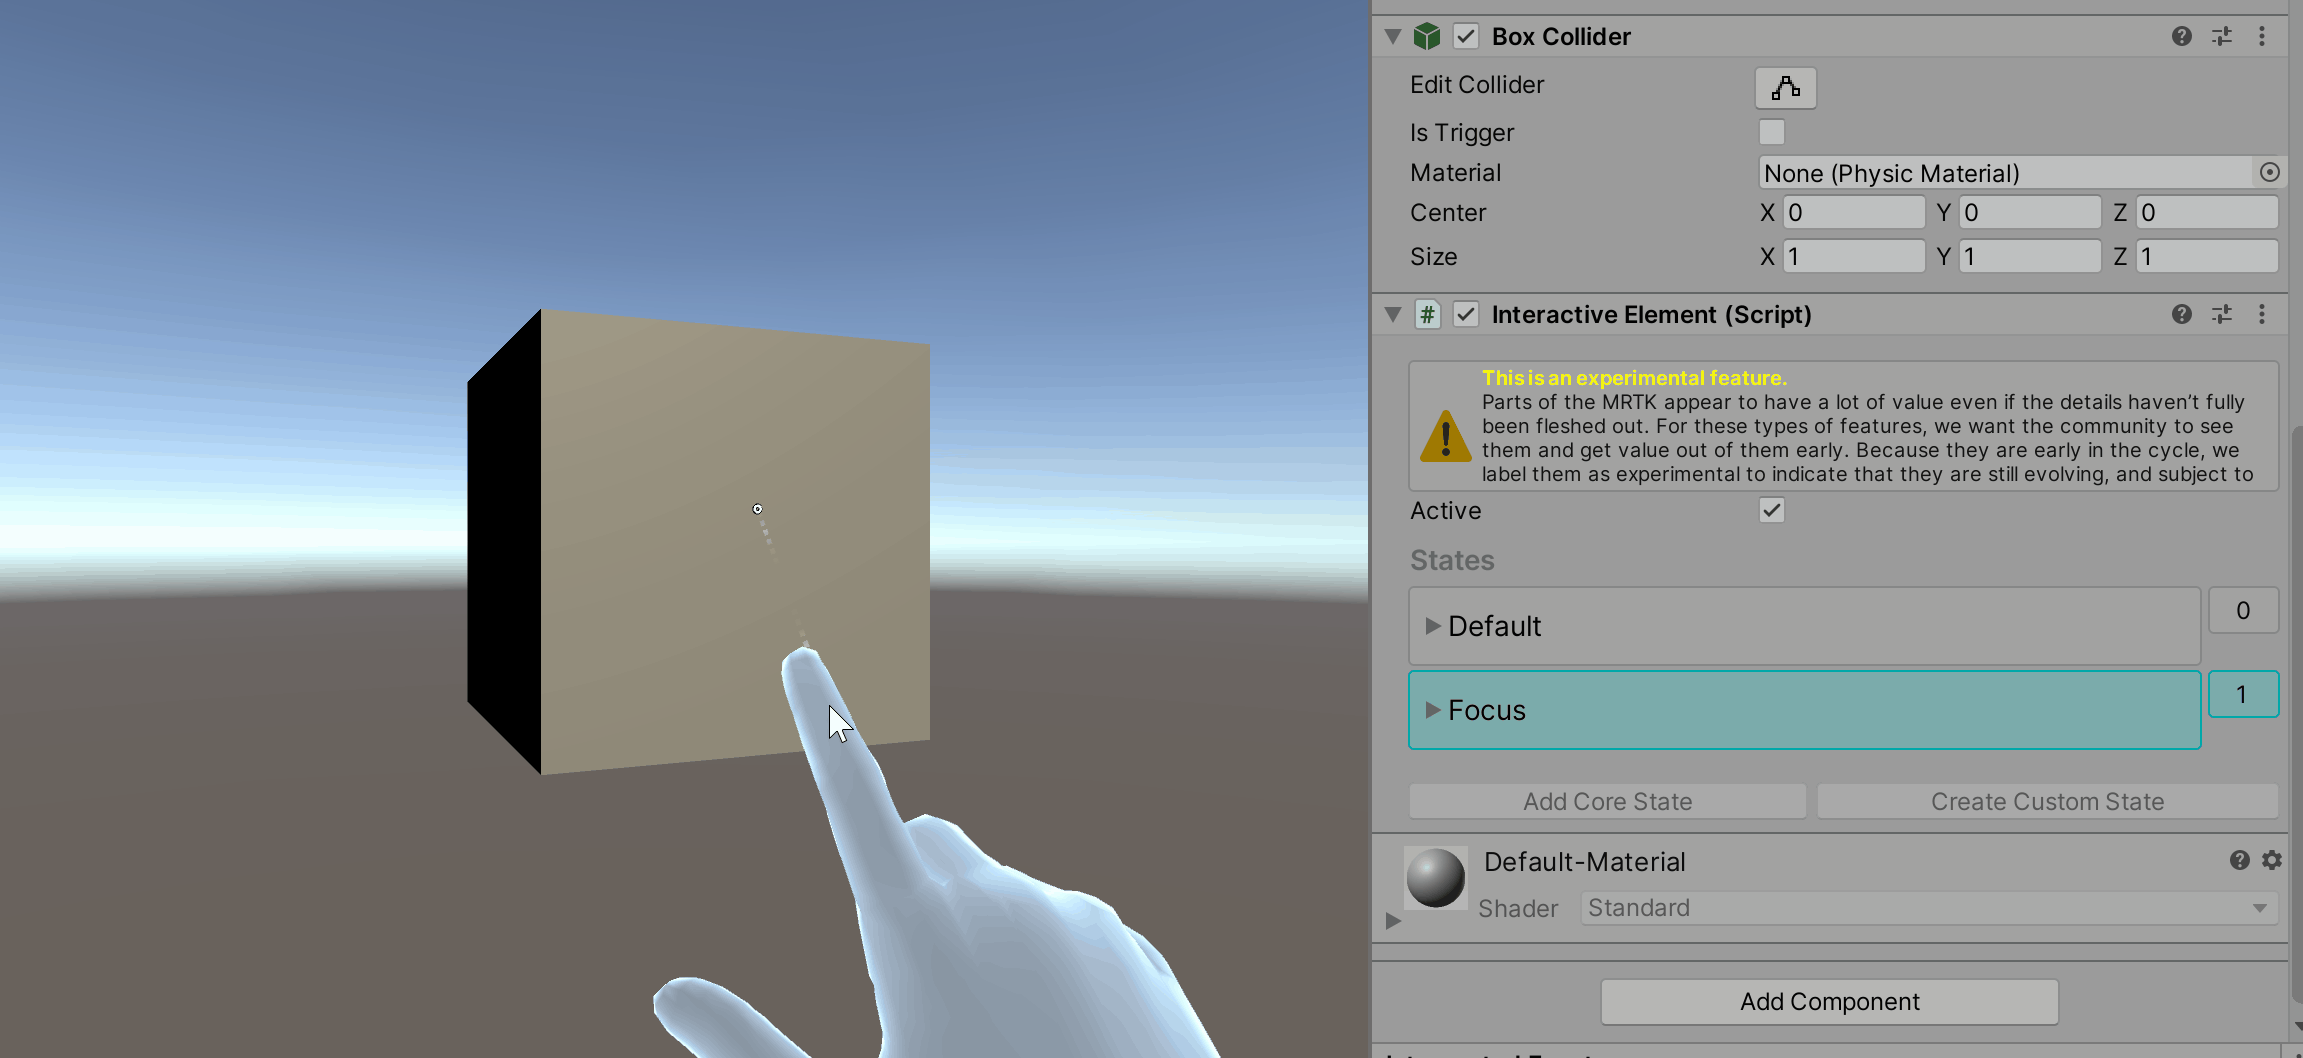 Focus state with virtual hand interaction